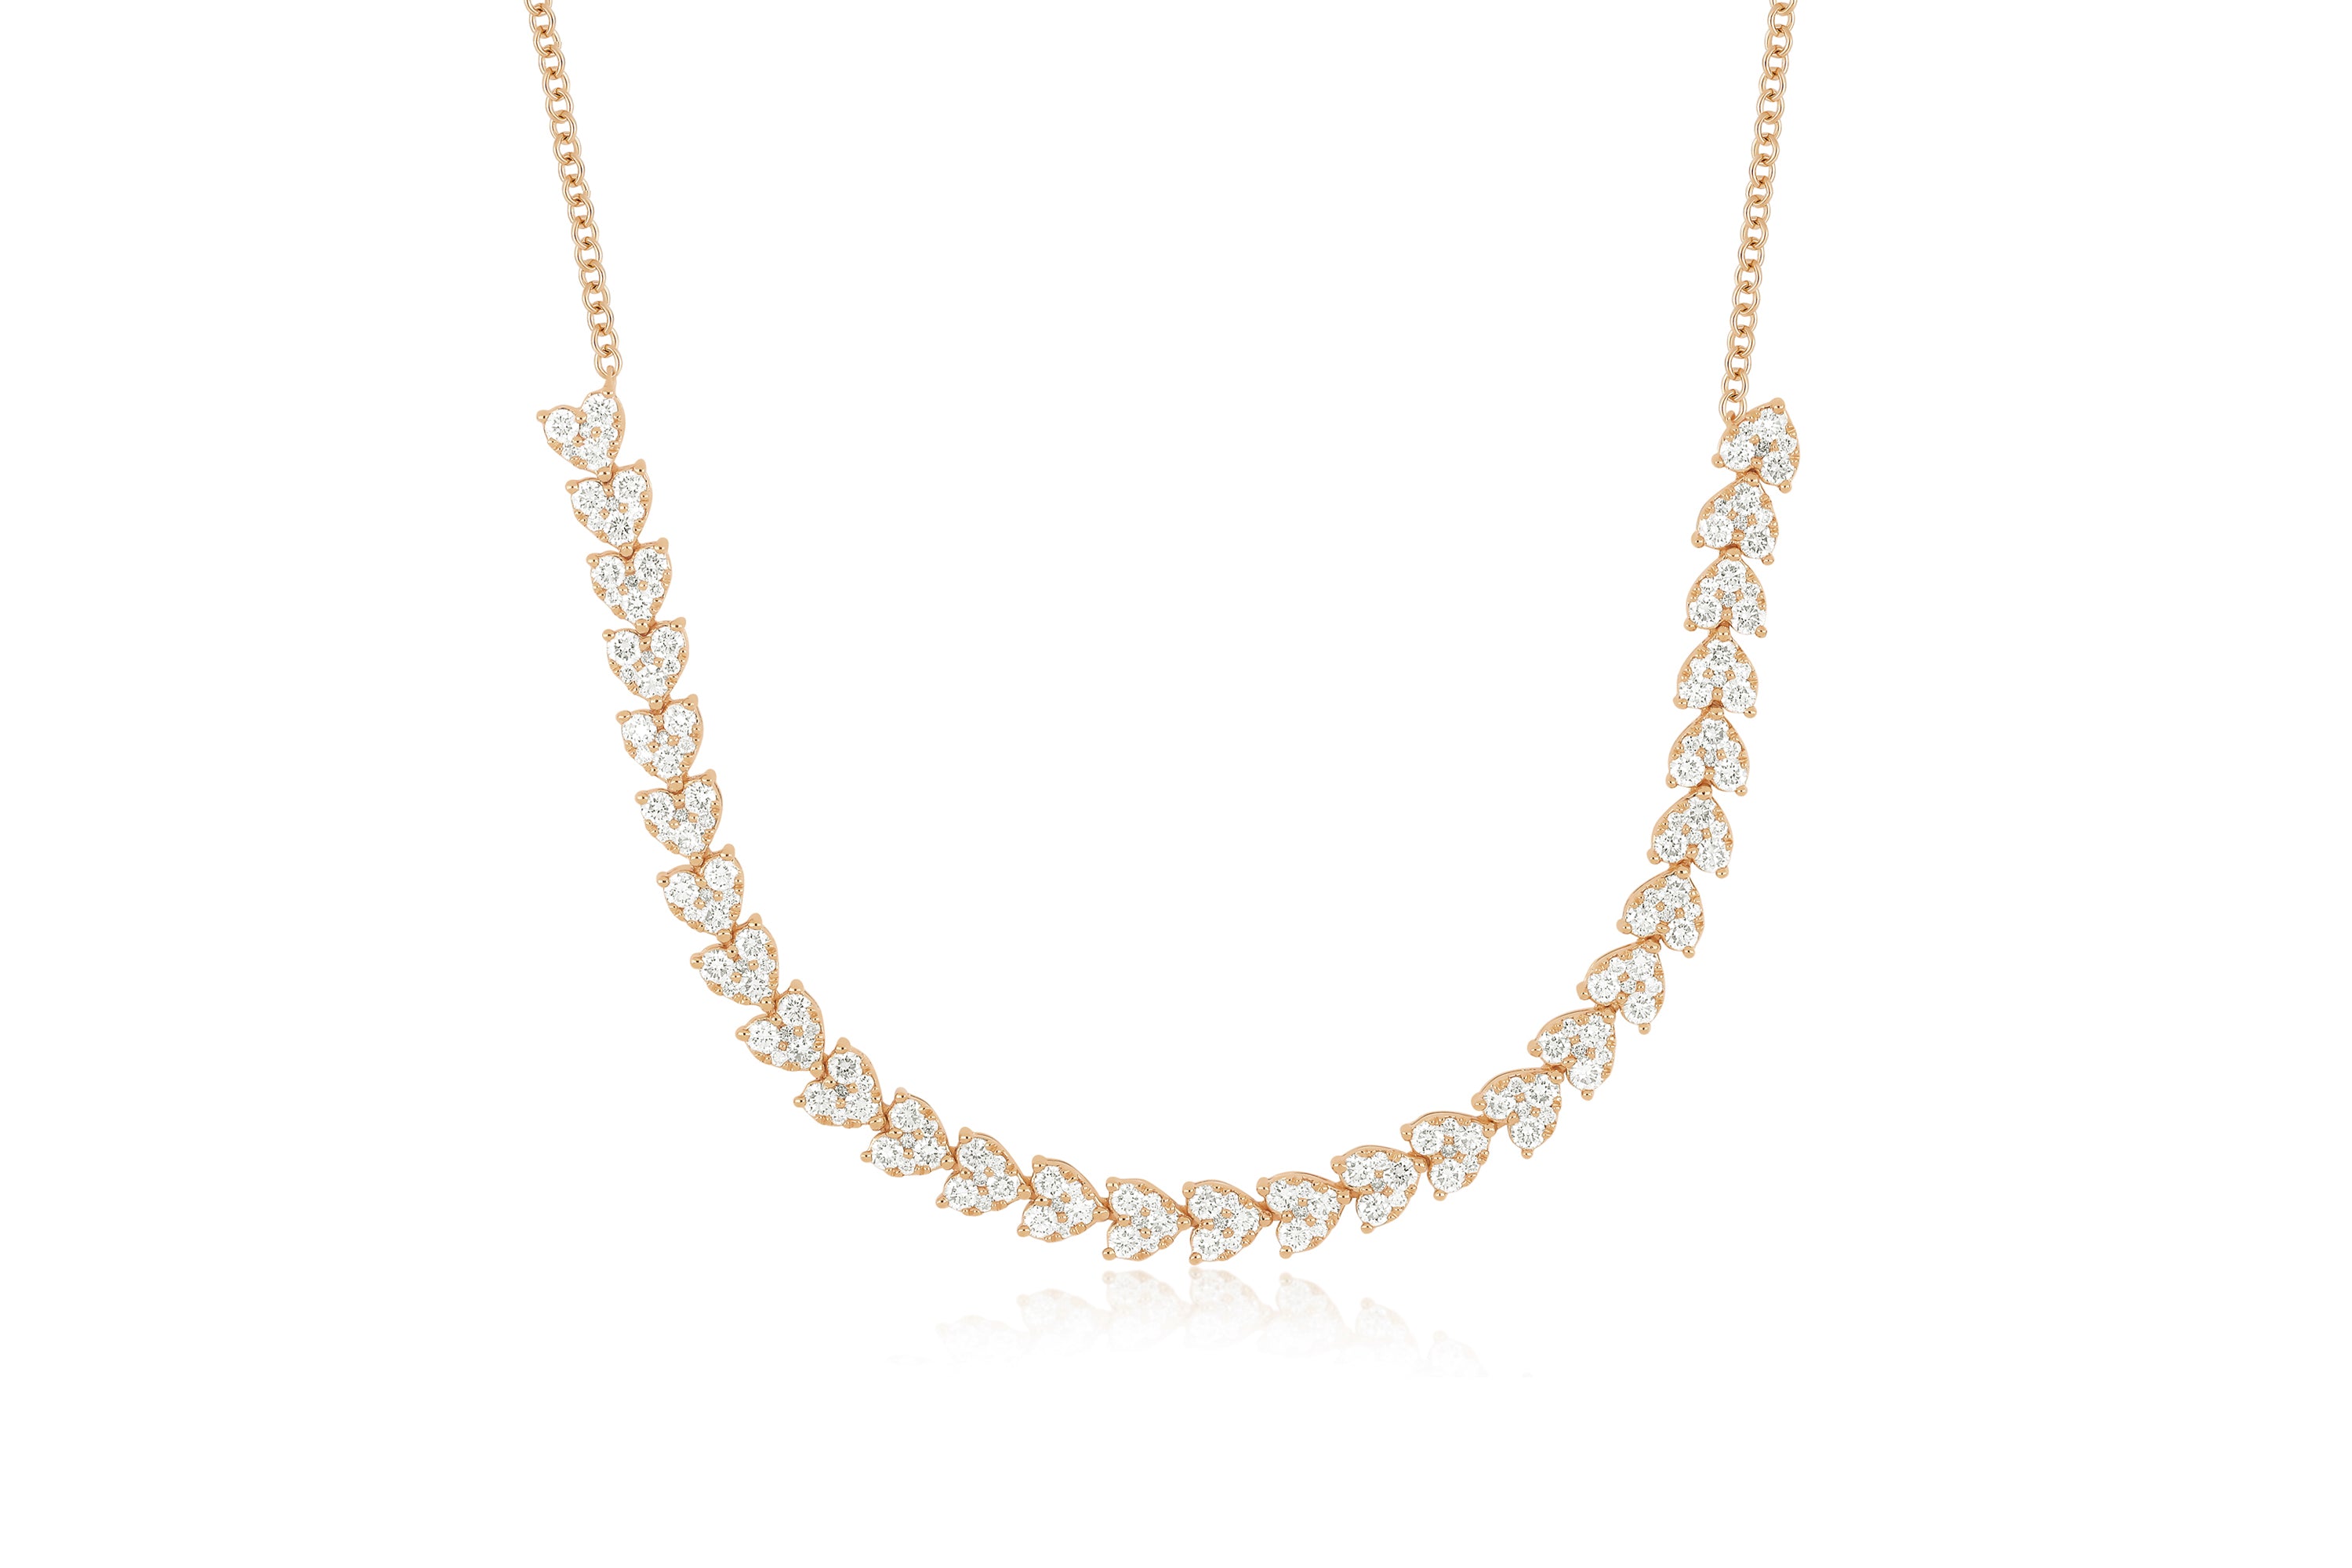 Endless Love Necklace in 14k rose gold